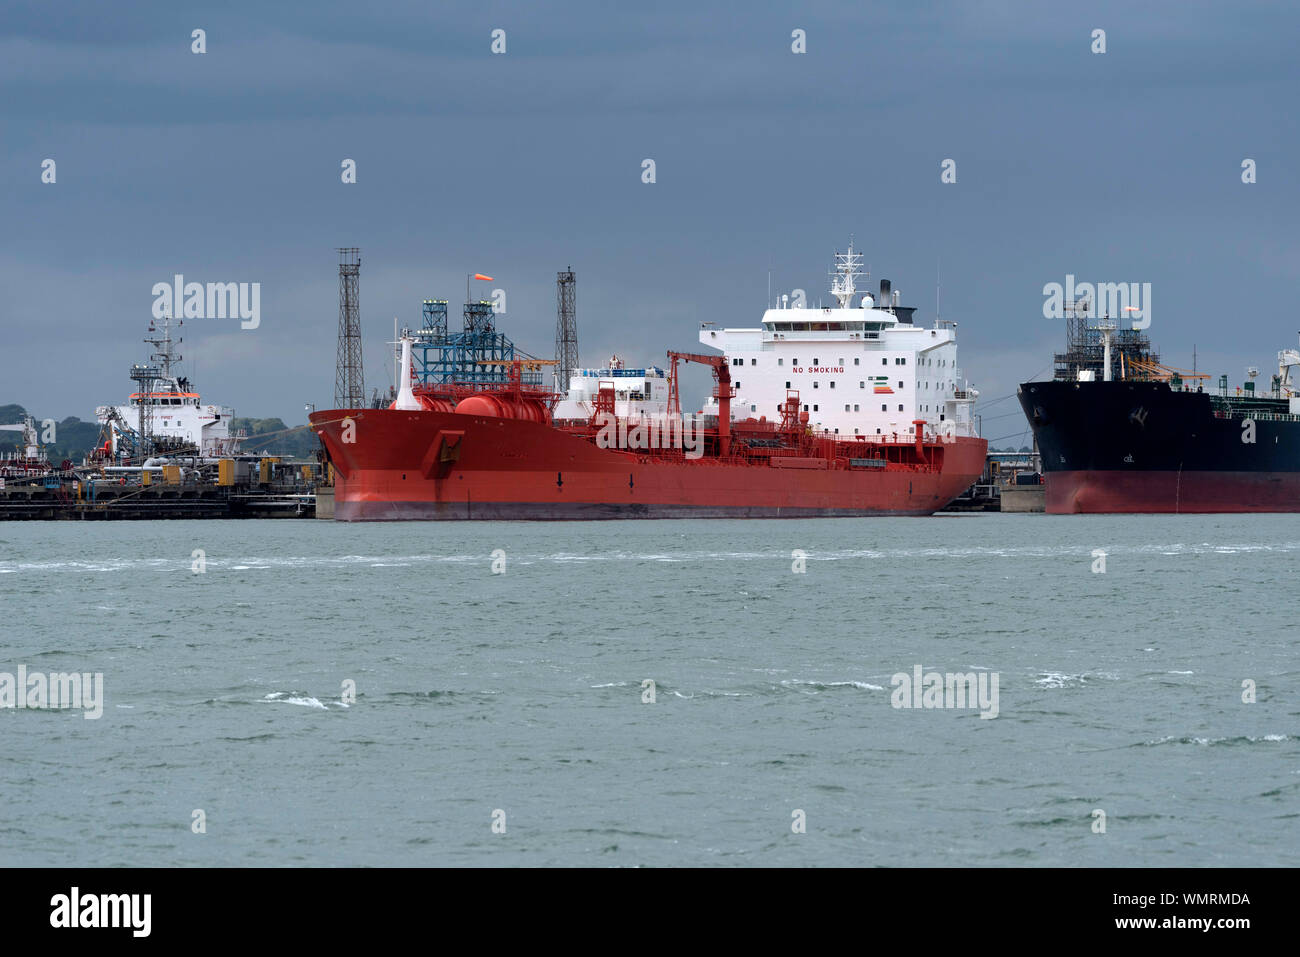 Southampton Water, England, UK, September 2019. Chemical, oil products tankers, off loading cargo at a refinery. Stock Photo